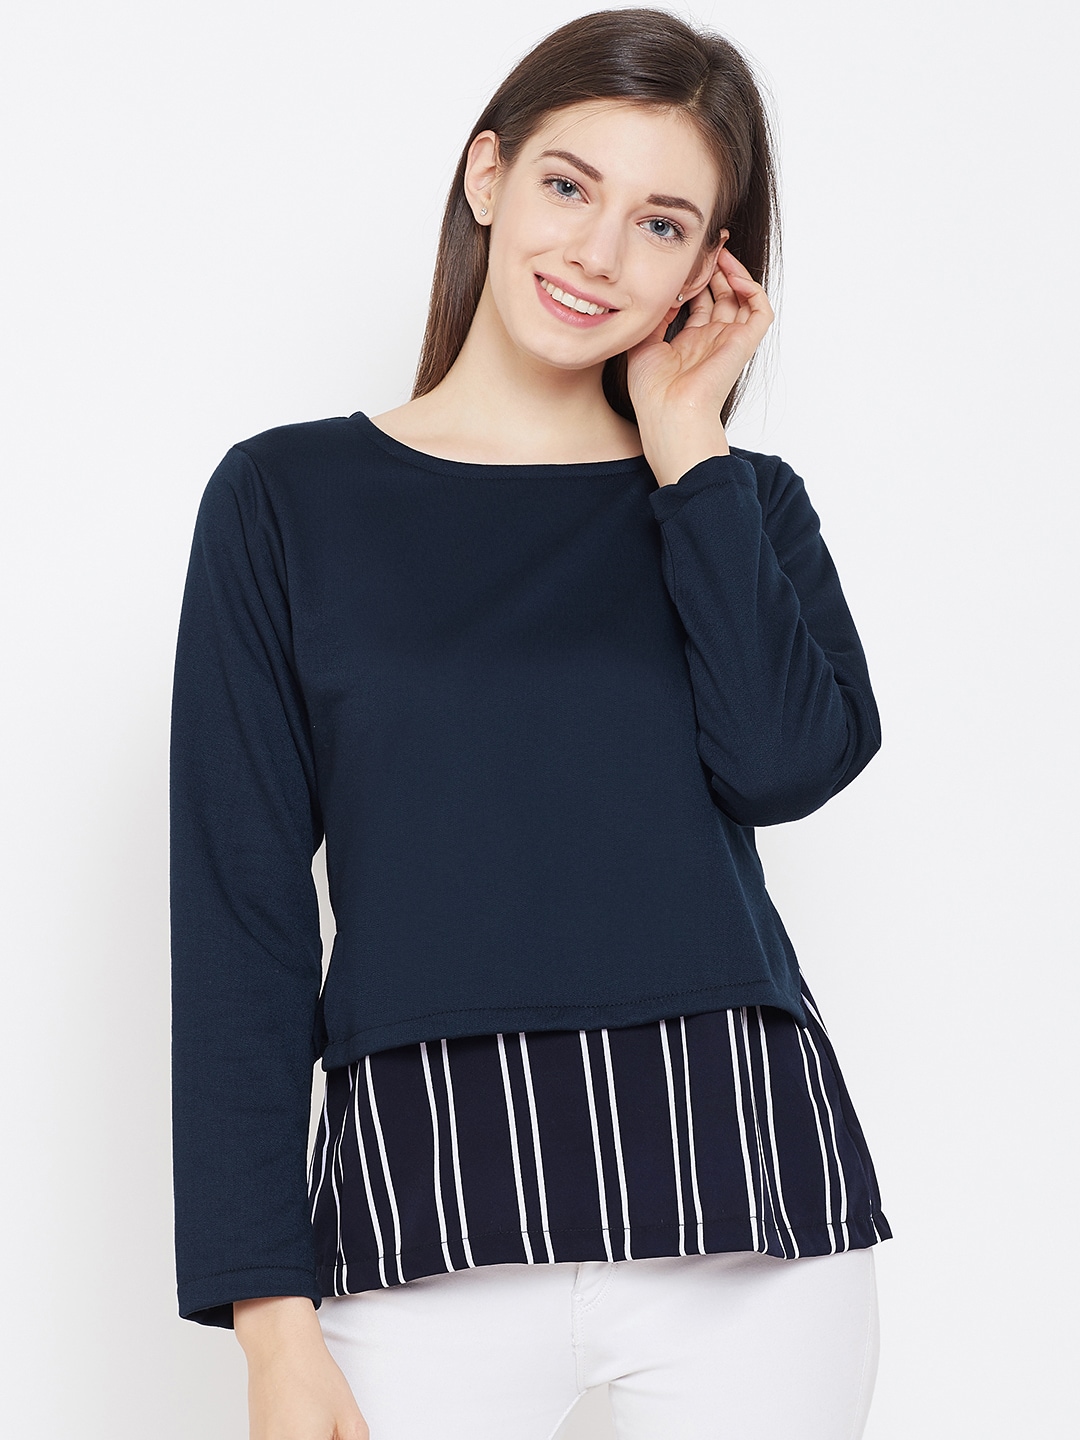 Belle Fille Women Navy Blue & White Solid Layered Sweatshirt Price in India